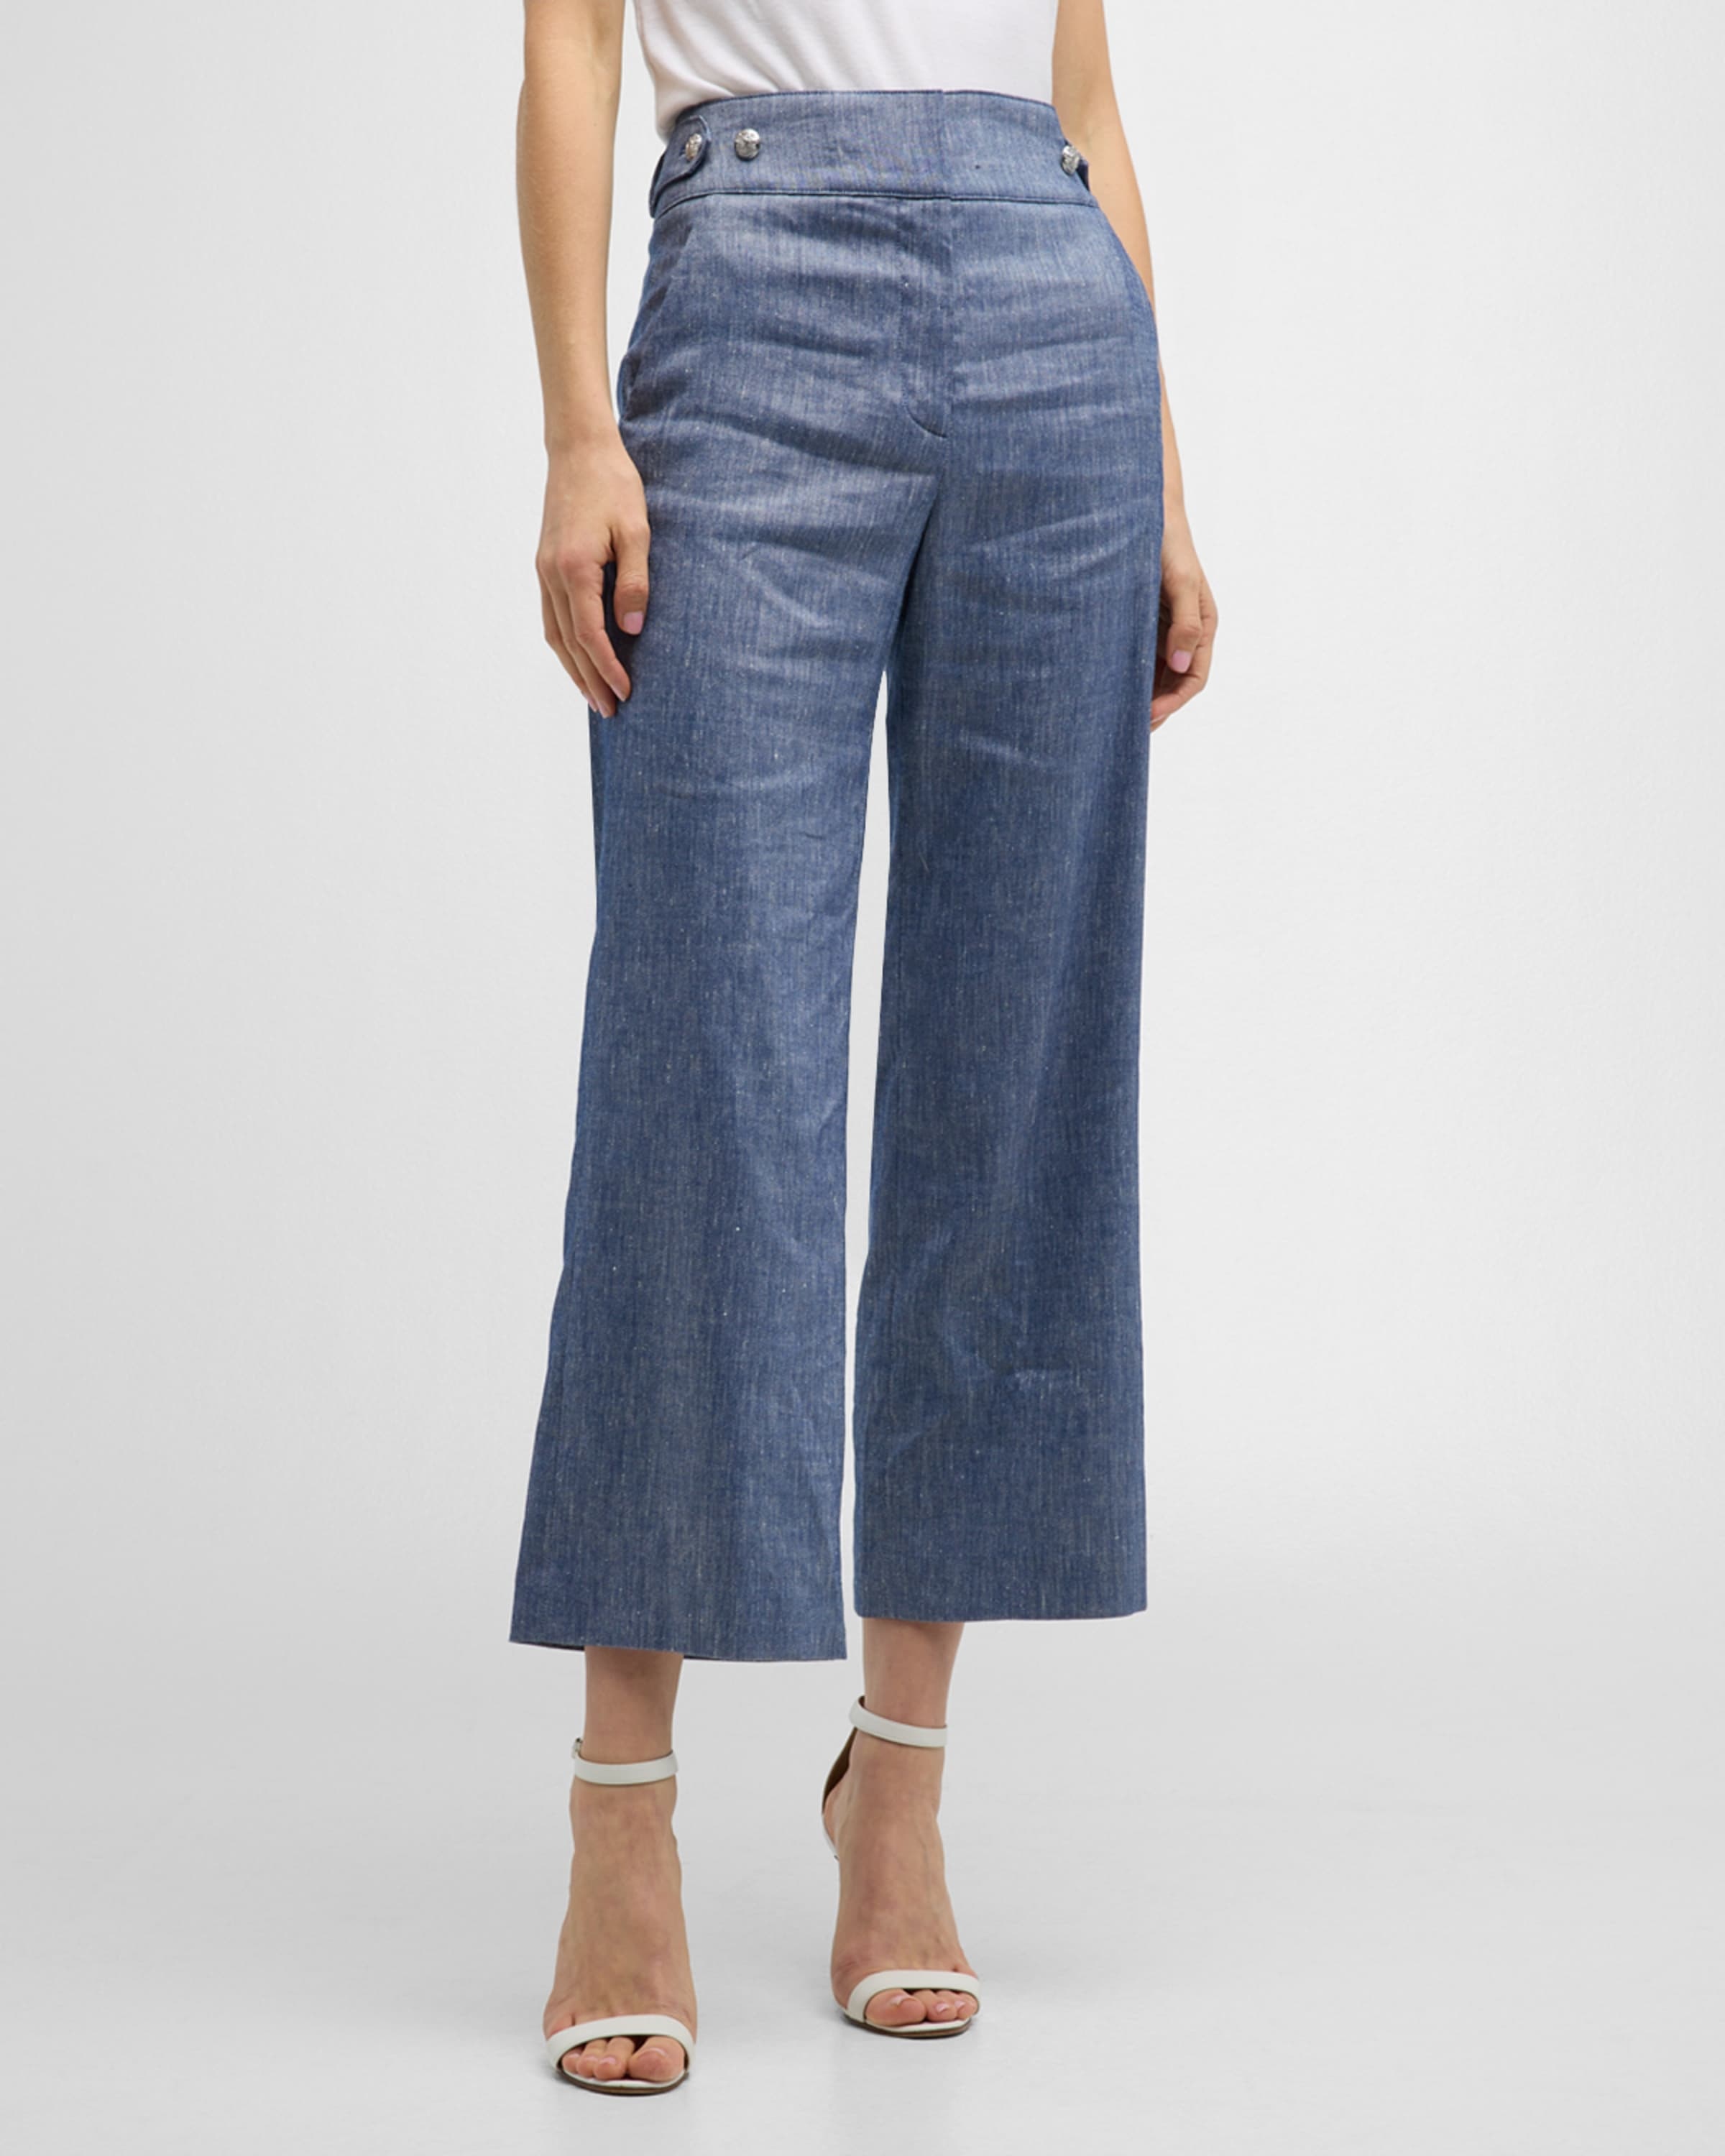 Aubrie Cropped Pants - 2